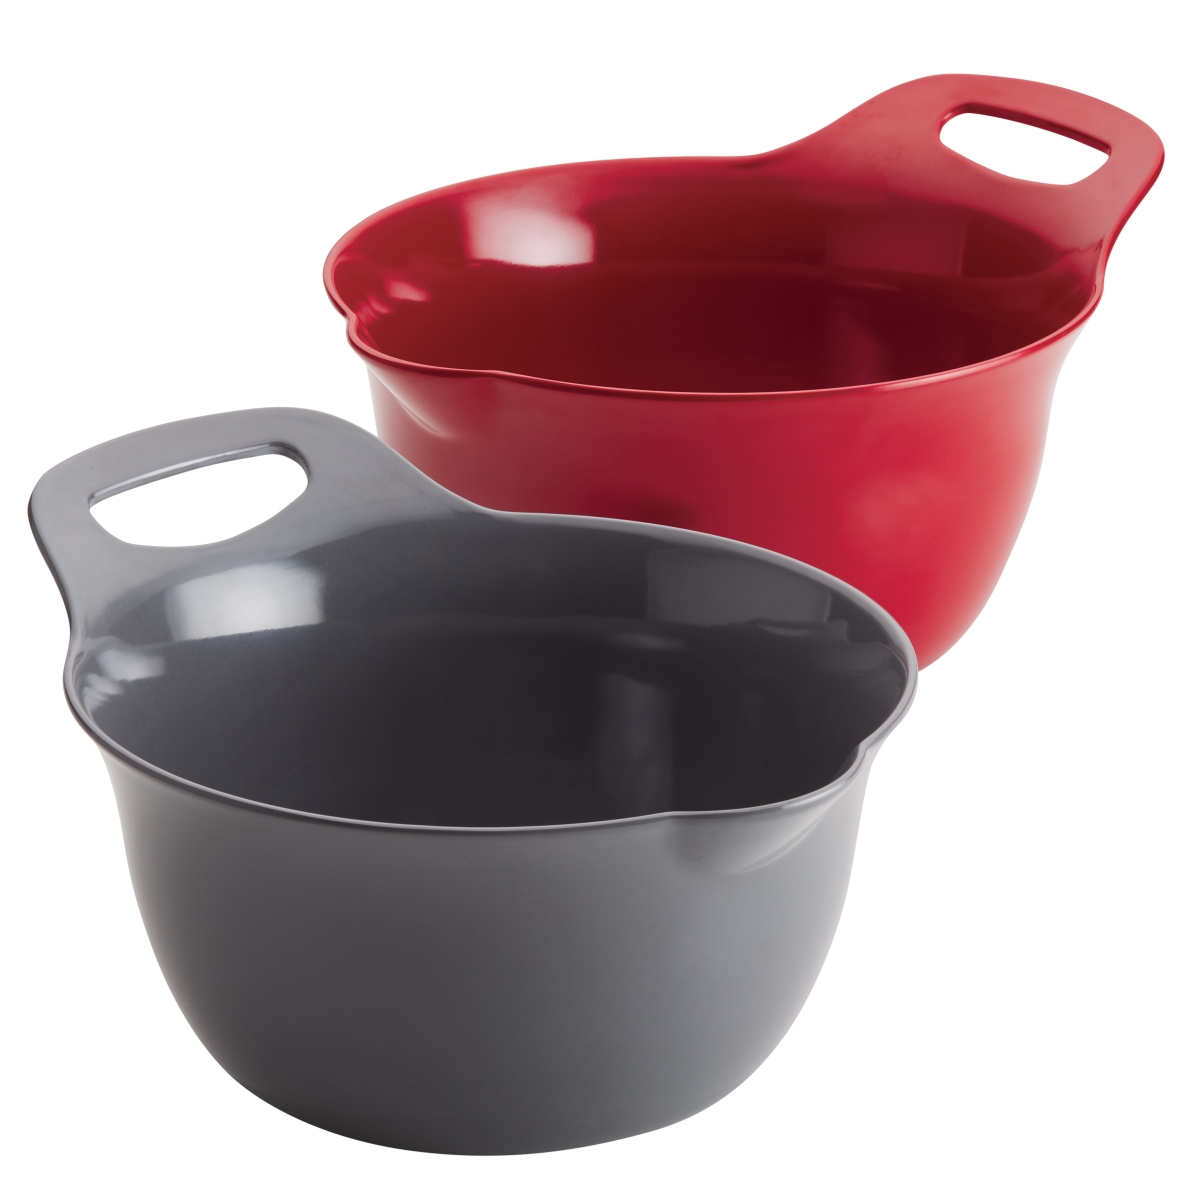 47647 Tools & Gadgets Nesting Mixing Bowl Set, 2 Piece - Red & Gray